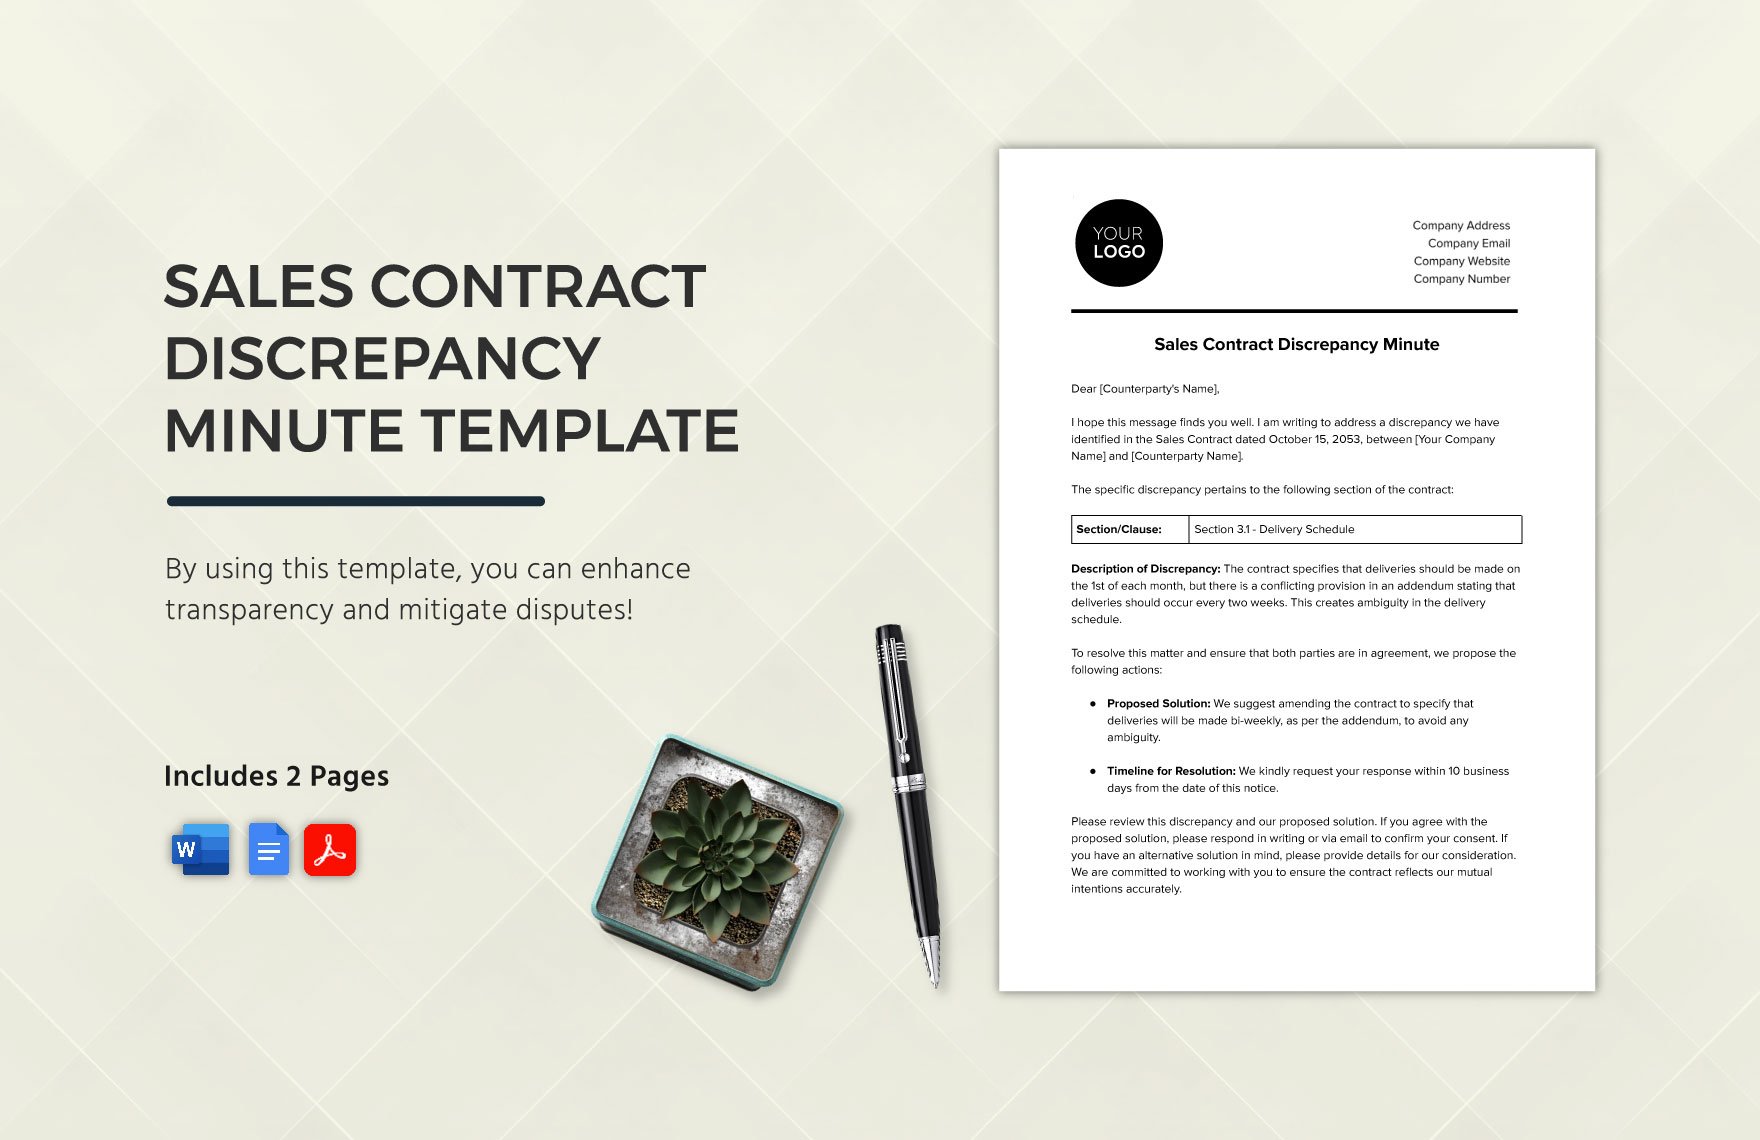 Sales Contract Discrepancy Minute Template in Word, Google Docs, PDF